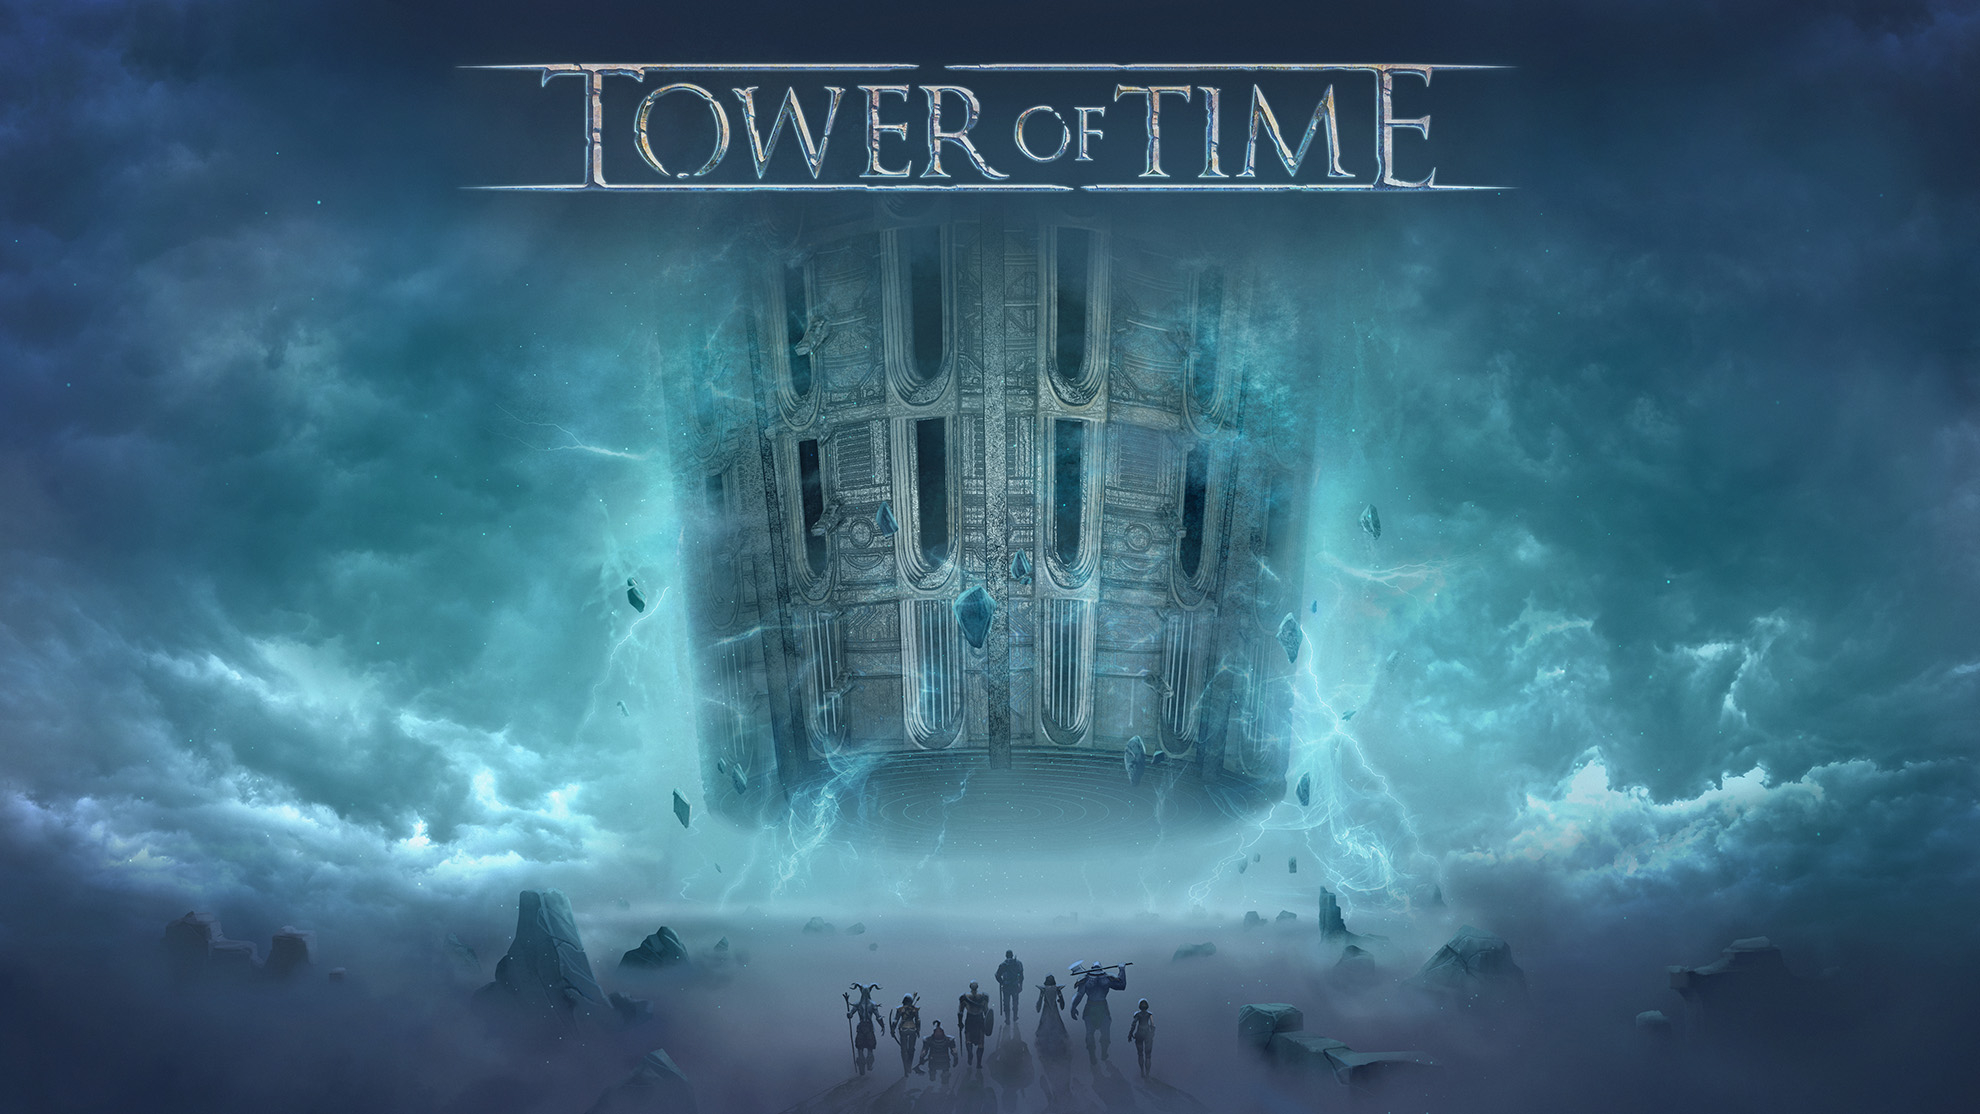 Steam tower of time фото 28